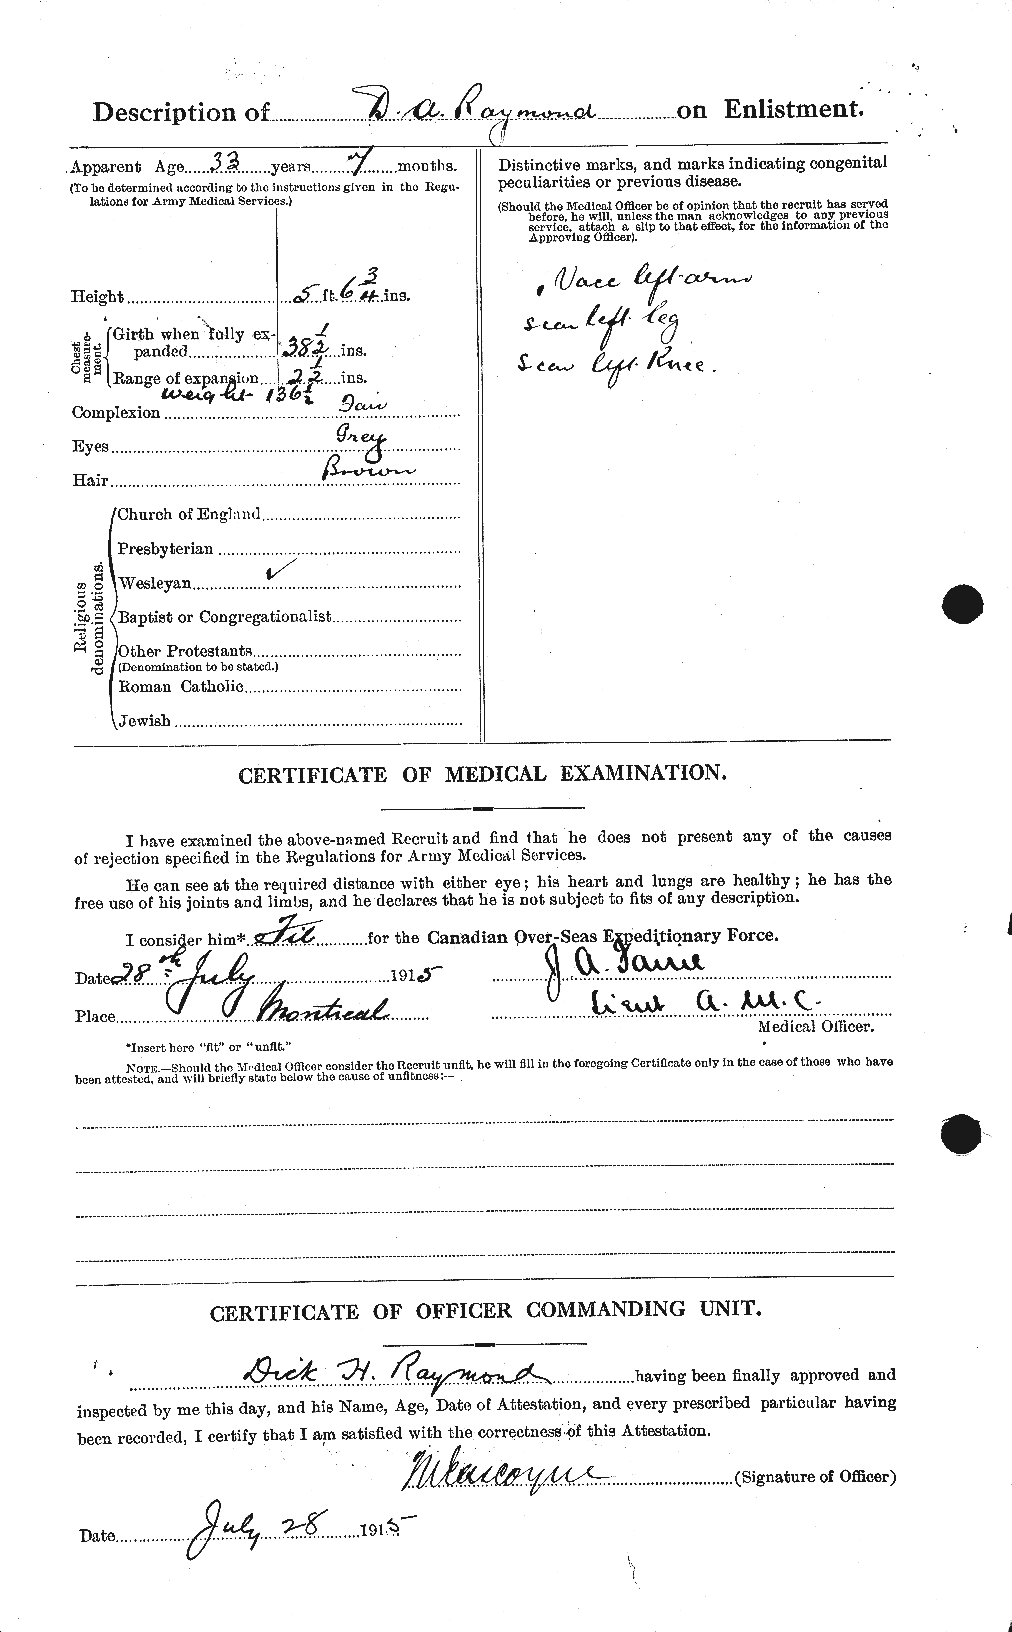 Personnel Records of the First World War - CEF 595295b